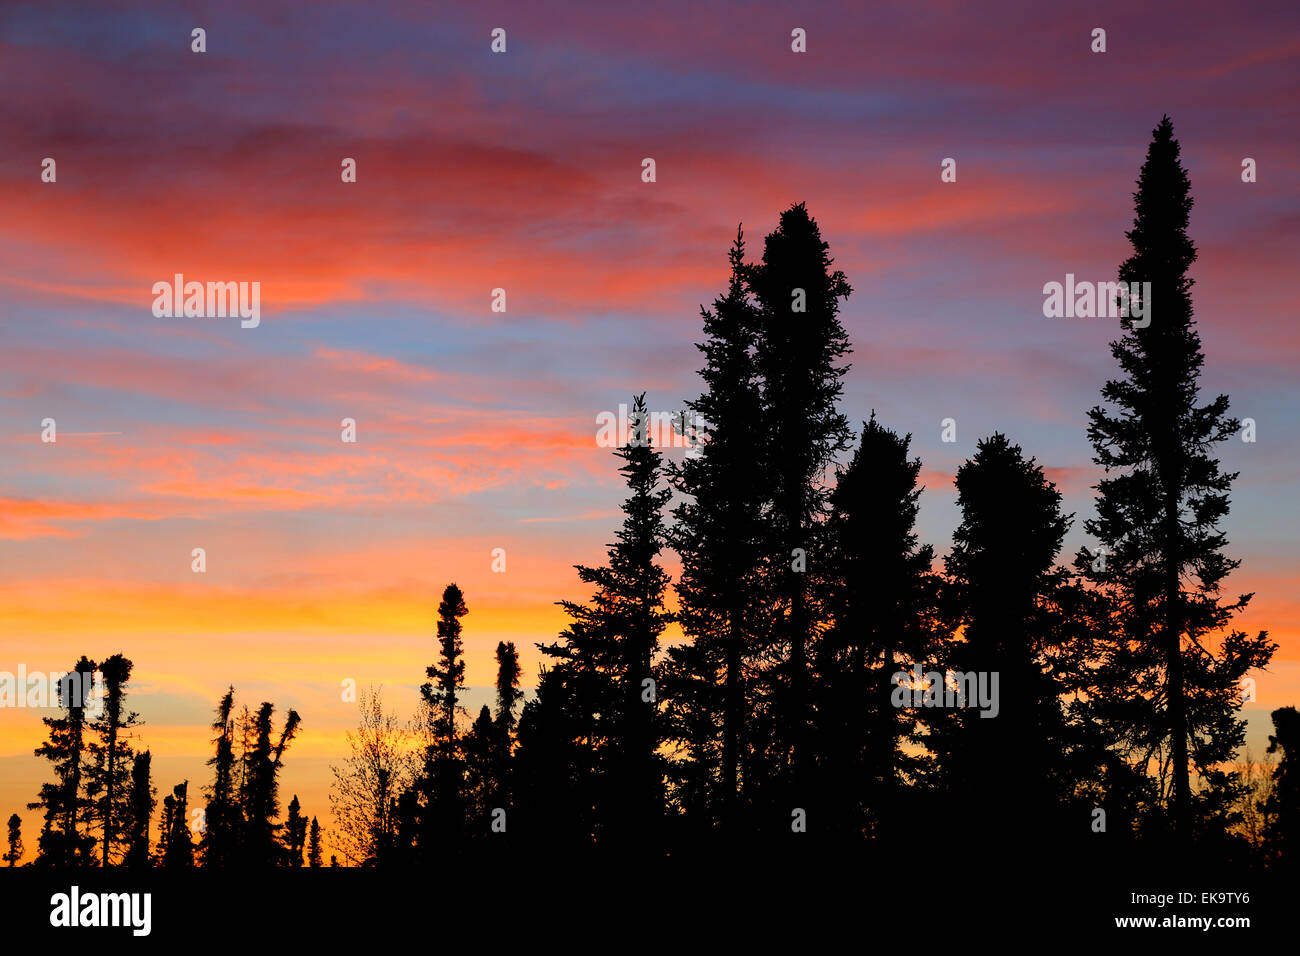 Black spruce trees silhouetted against a brilliantly colorful sunset Stock Photo